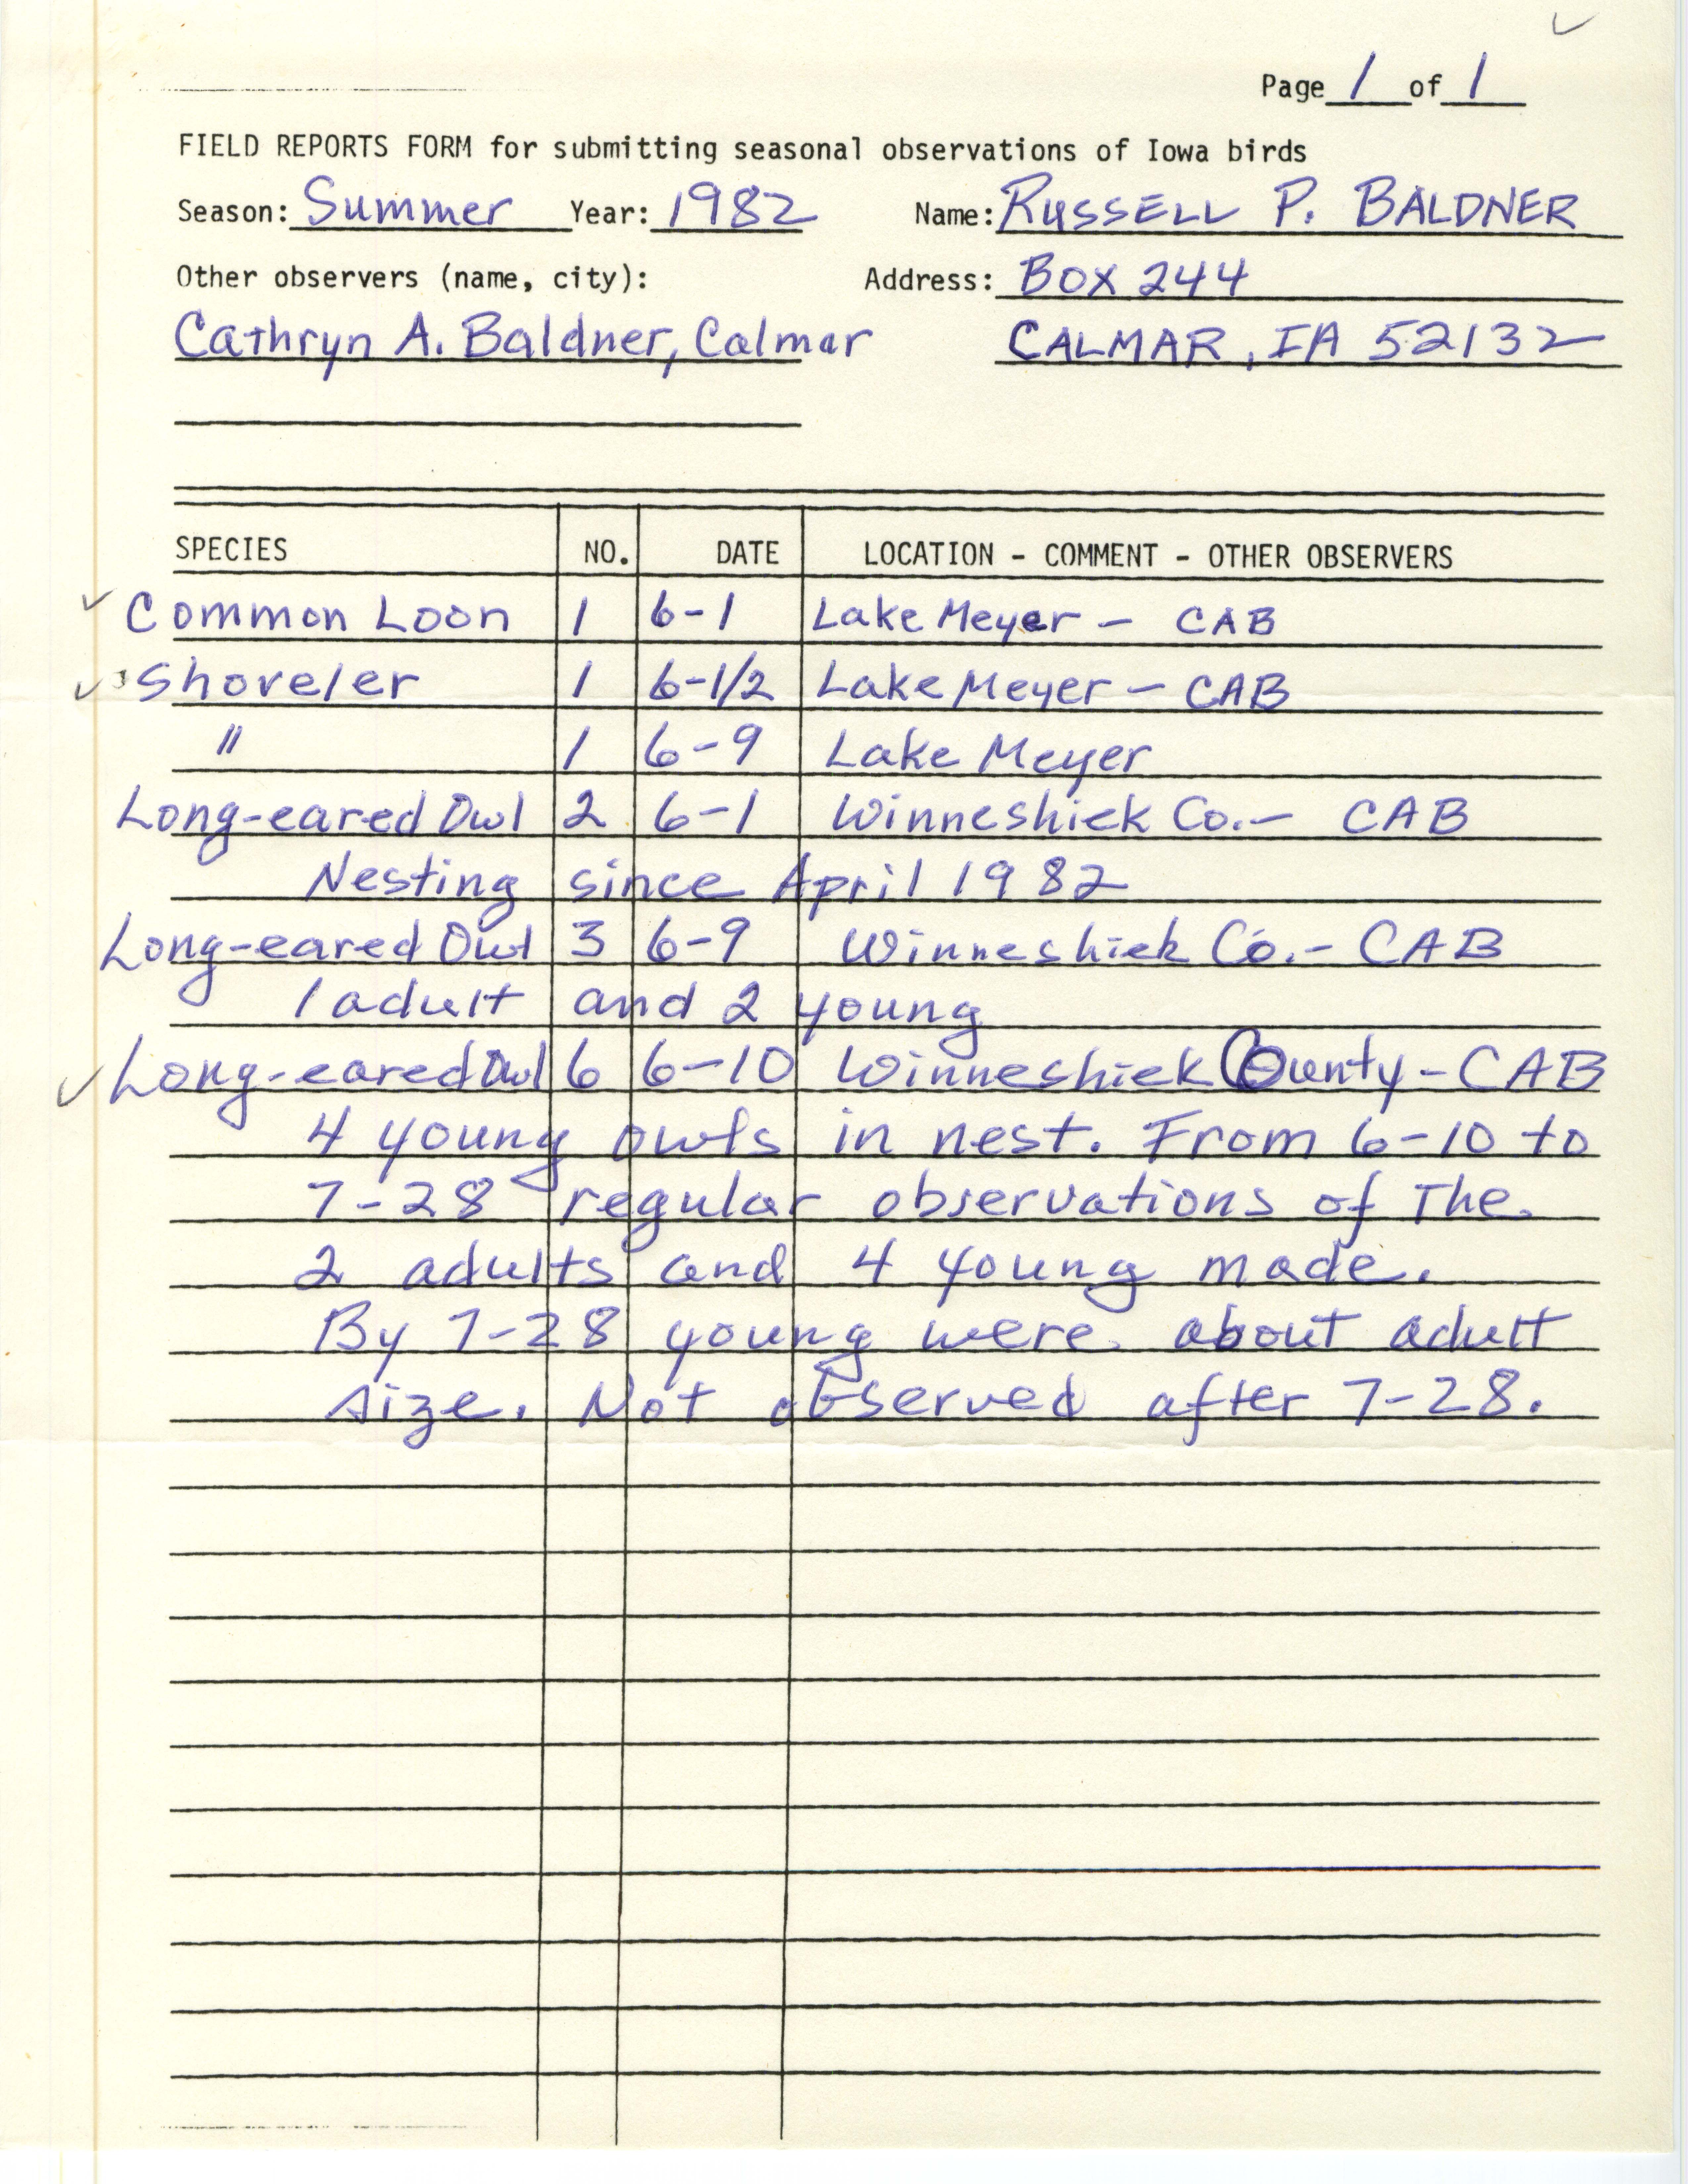 Field report contributed by Russell P. Baldner and Cathryn A. Baldner, summer 1982